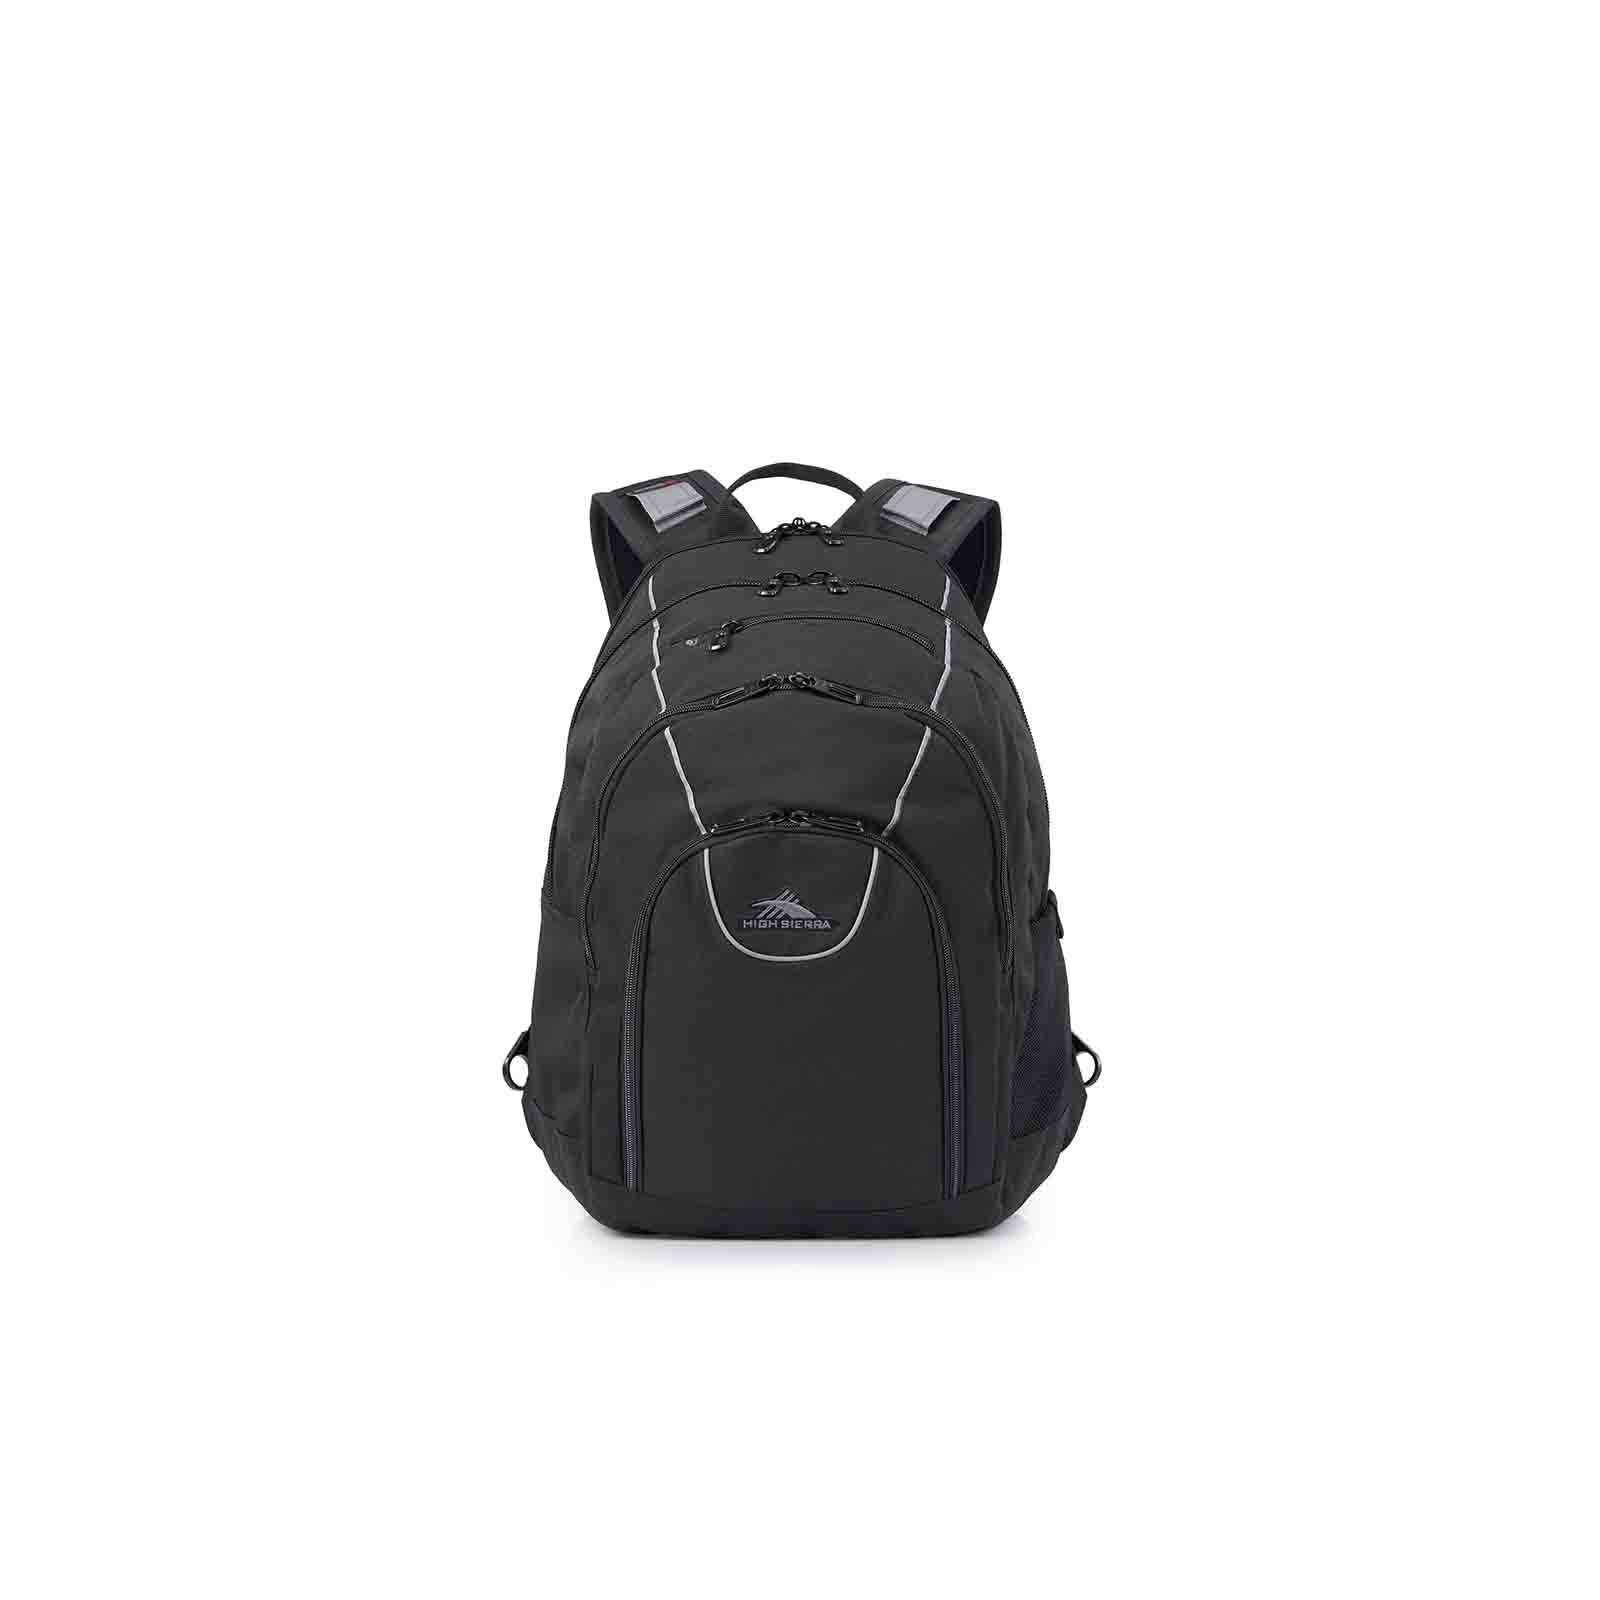 High-Sierra-Academy-3-Eco-15-Inch-Laptop-Backpack-Black-Front